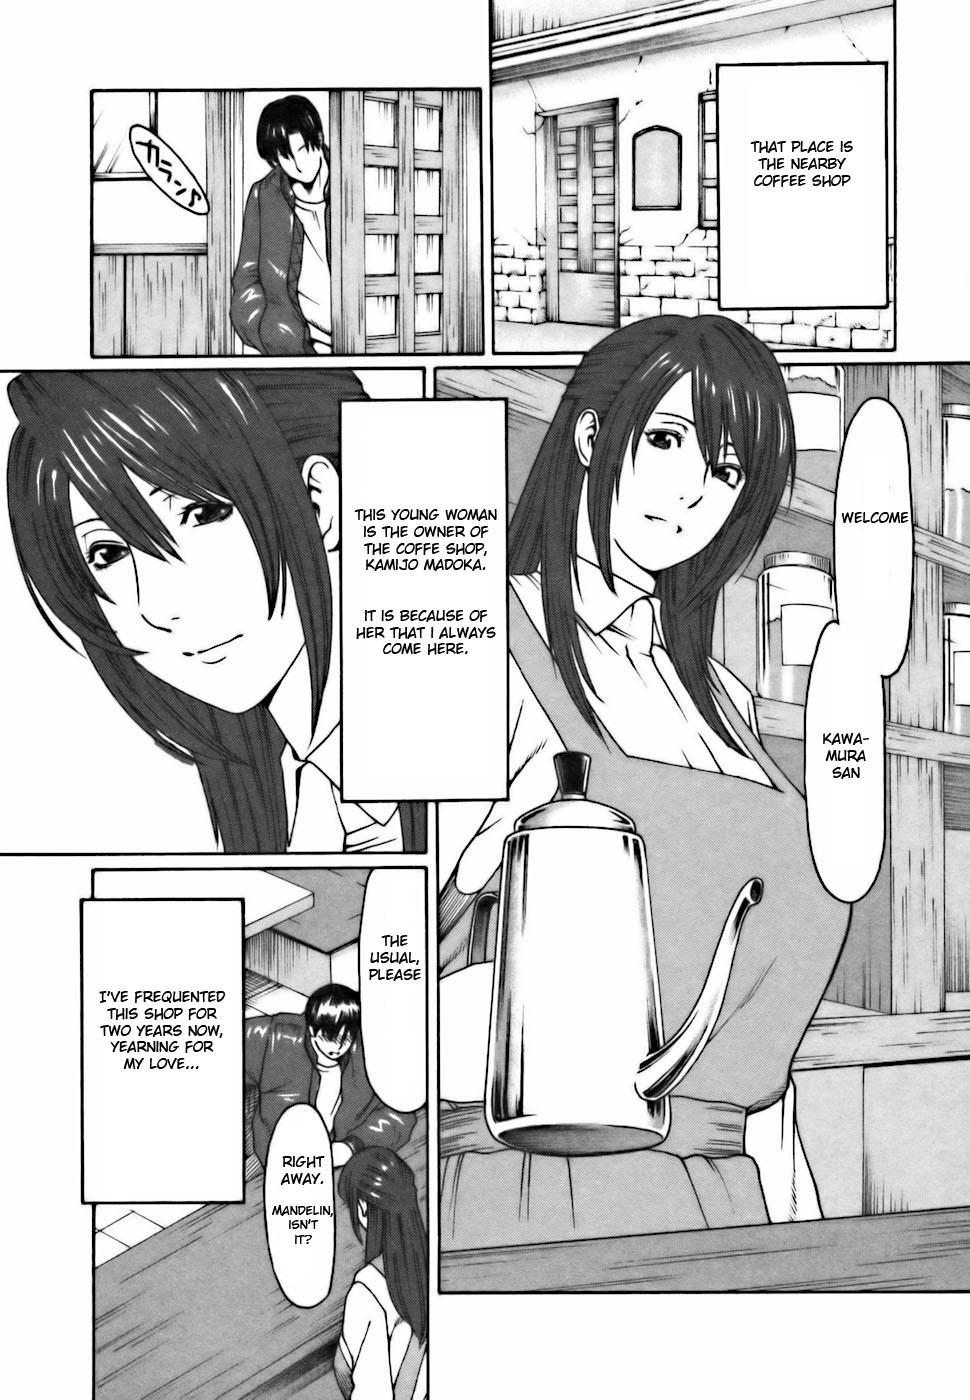 Cafe e Youkoso - Welcome To A Cafe Ch. 1 11